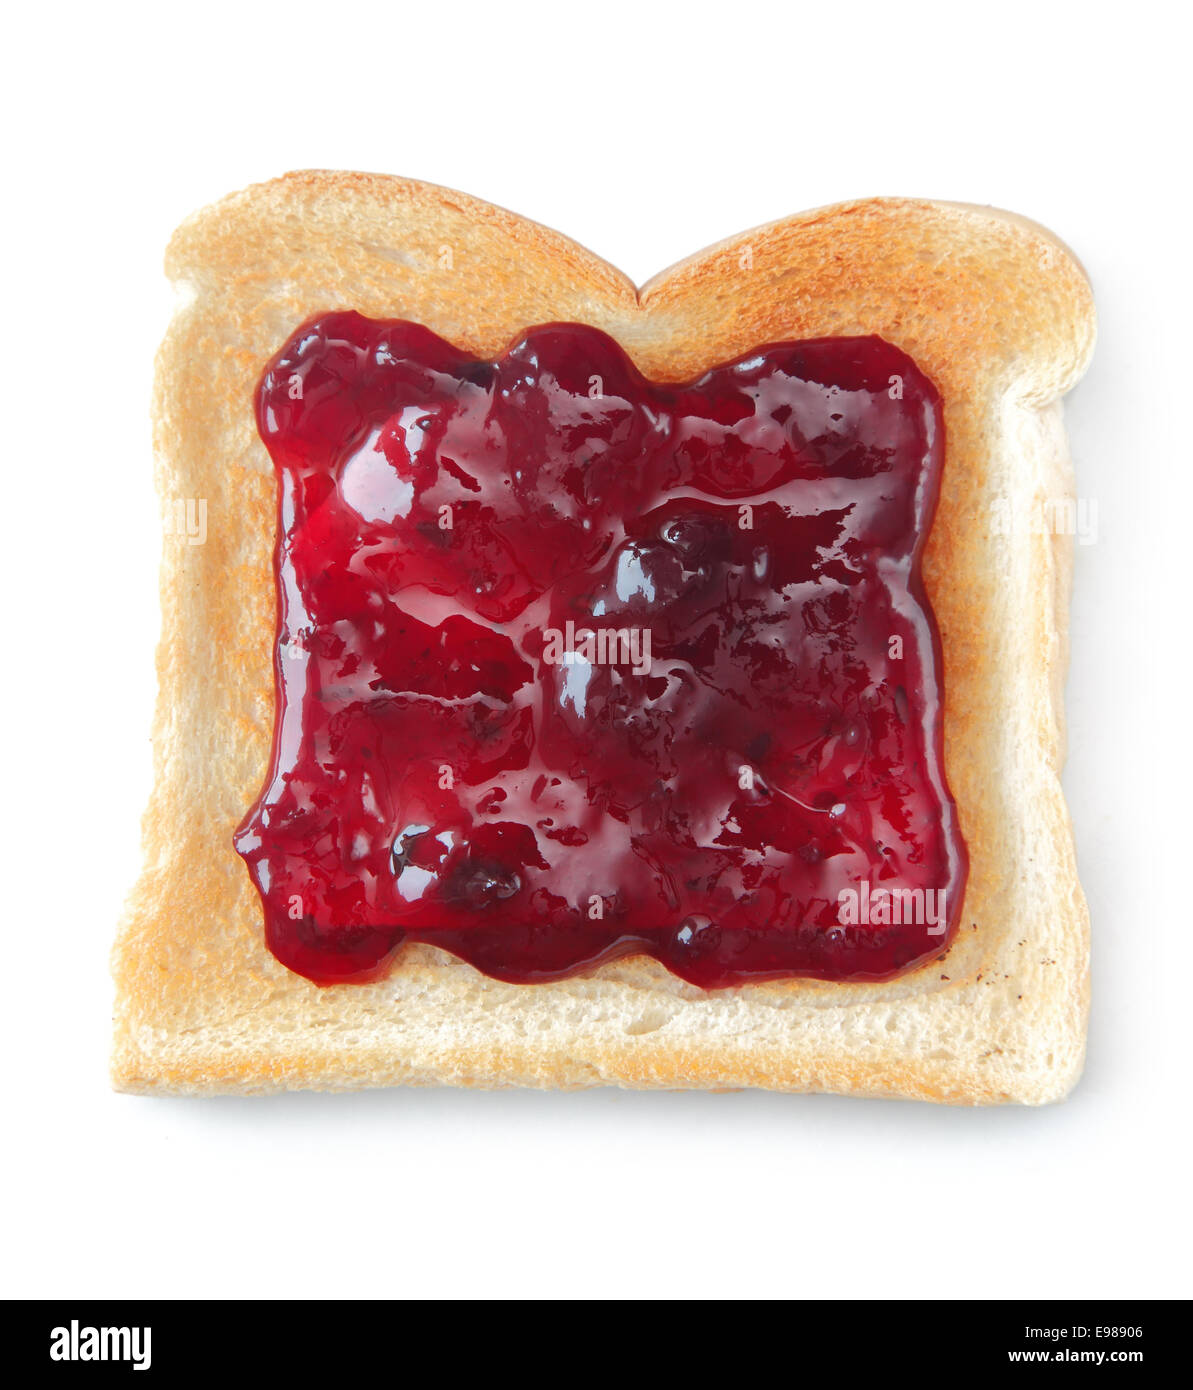 Slice of toast on a white background, made from white bread a liberally coated with a red berry jam Stock Photo